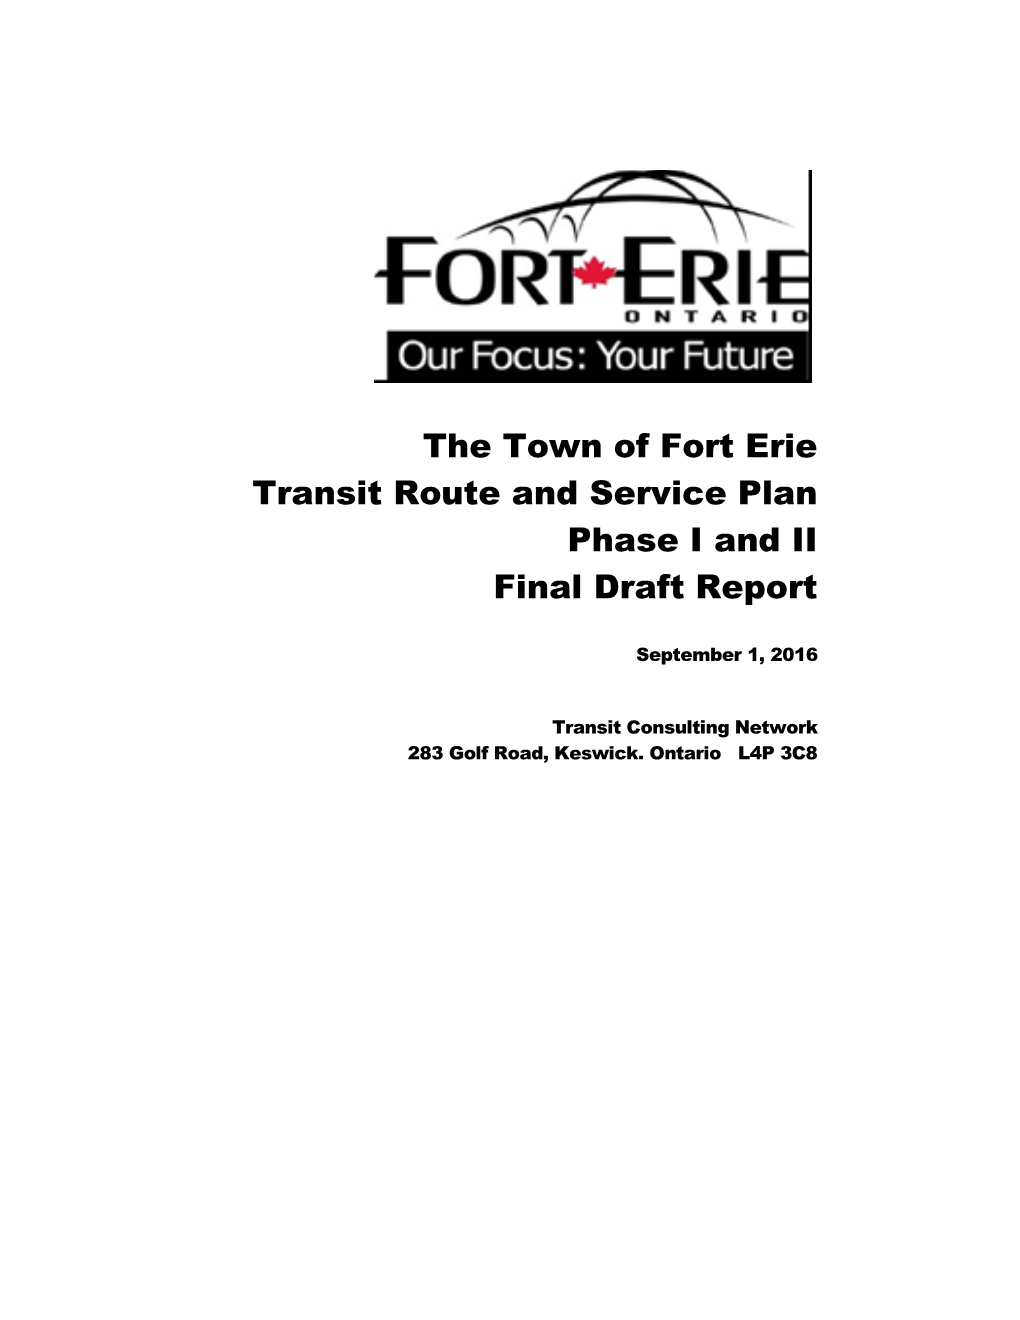 The Town of Fort Erie Transit Route and Service Plan Phase I and II Final Draft Report